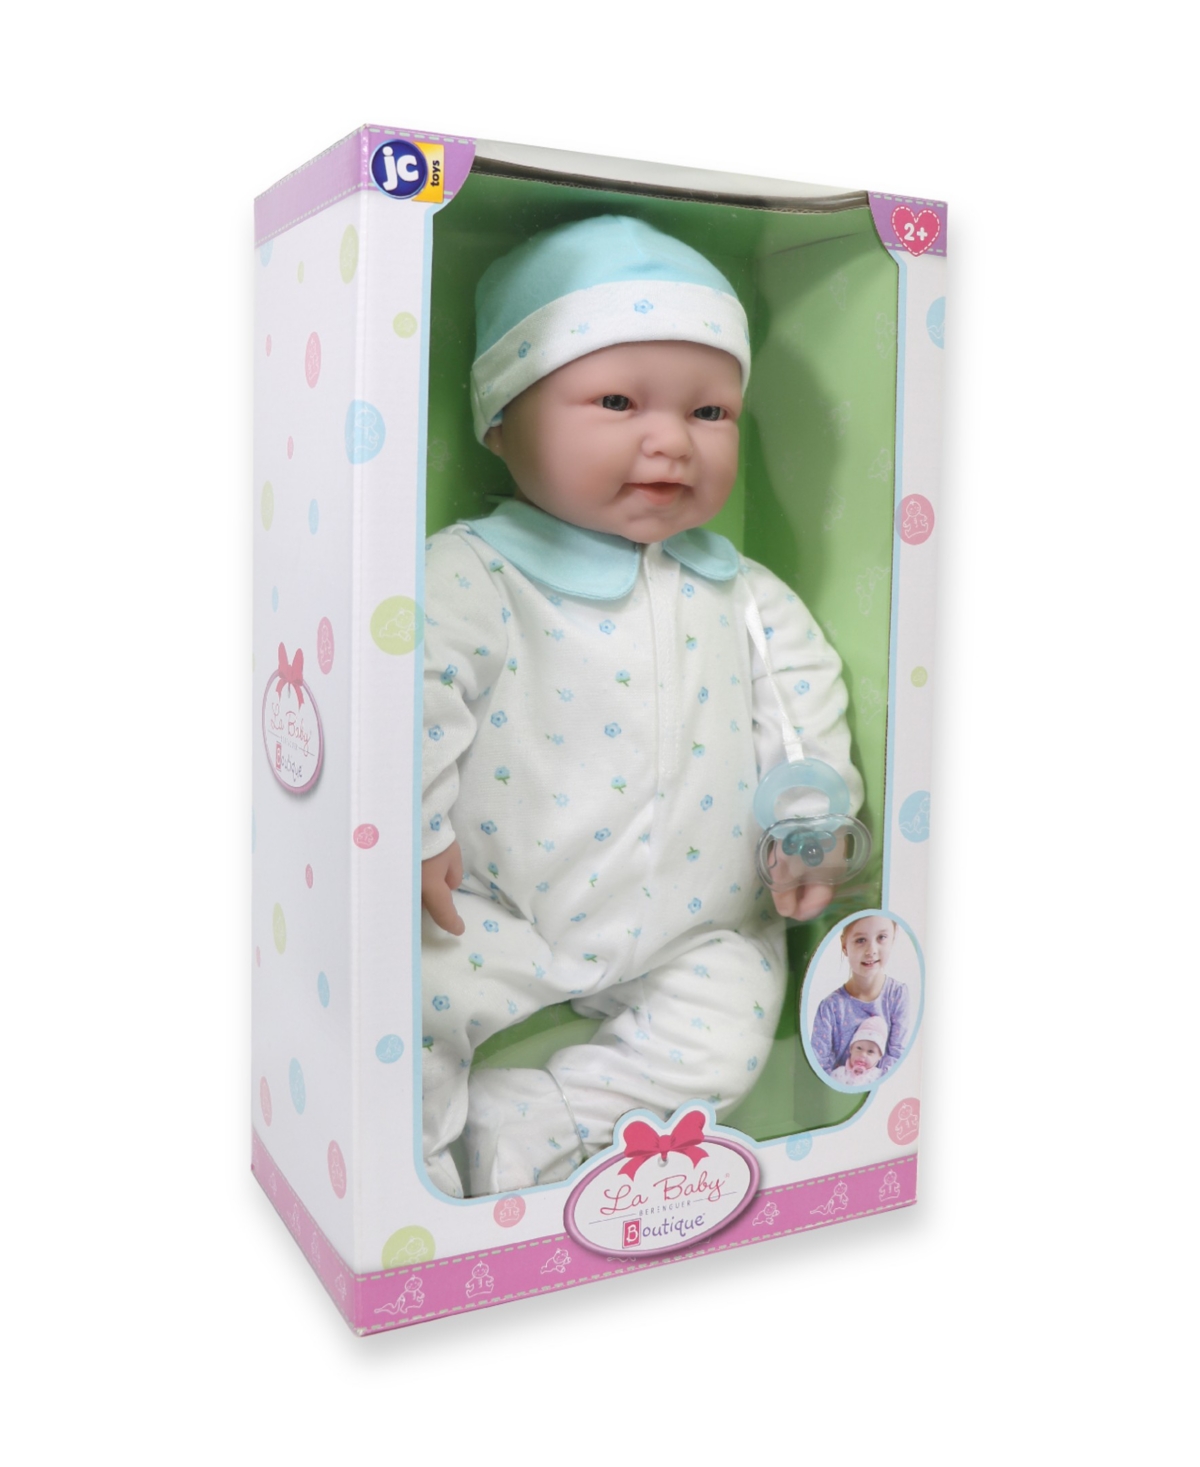 Shop Jc Toys La Baby Caucasian 20" Soft Body Baby Doll Blue Outfit